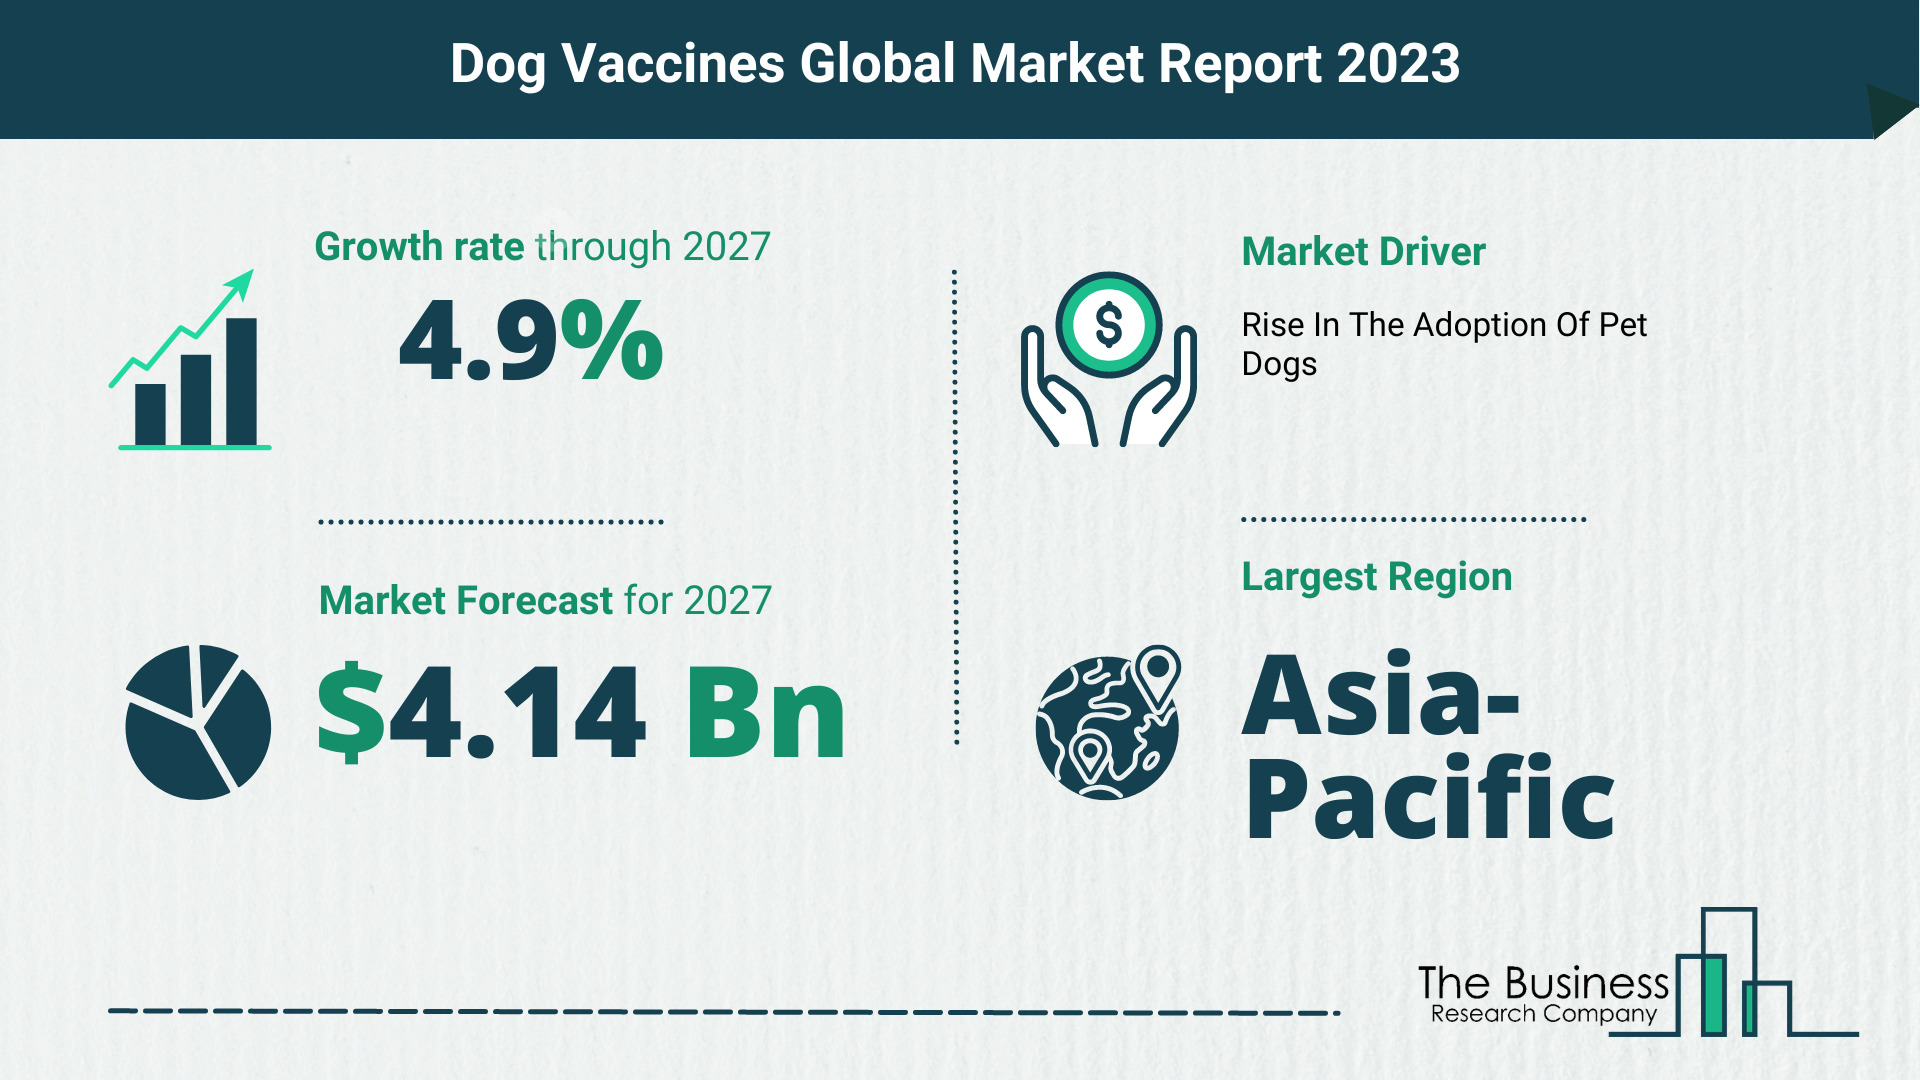 What Will The Dog Vaccines Market Look Like In 2023?